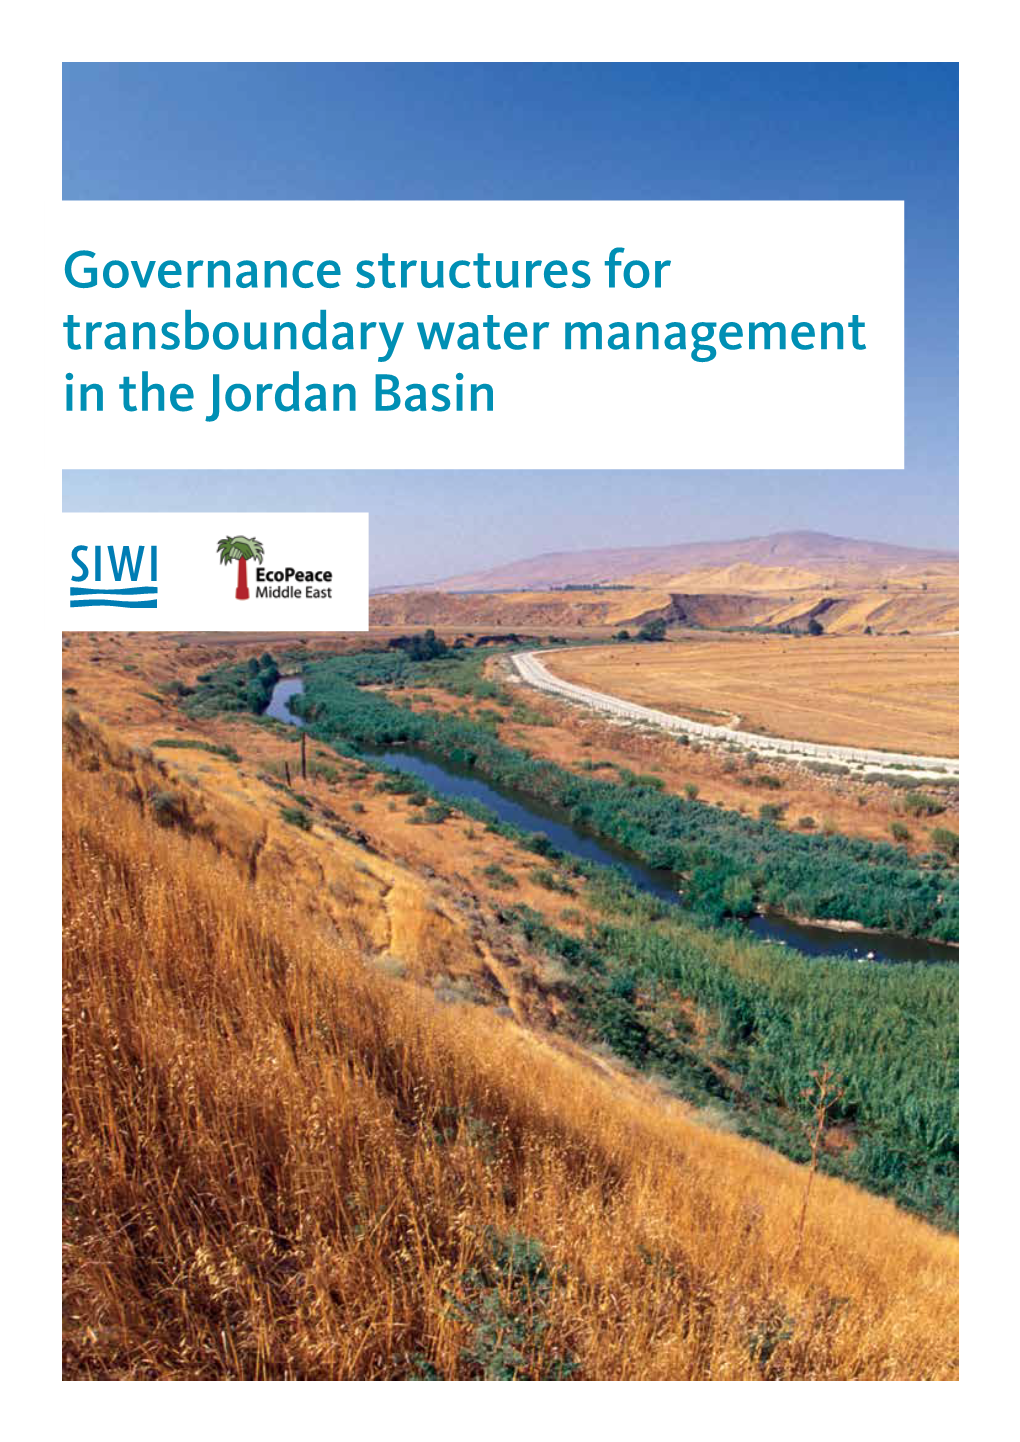 Governance Structures for Transboundary Water Management in the Jordan Basin Content